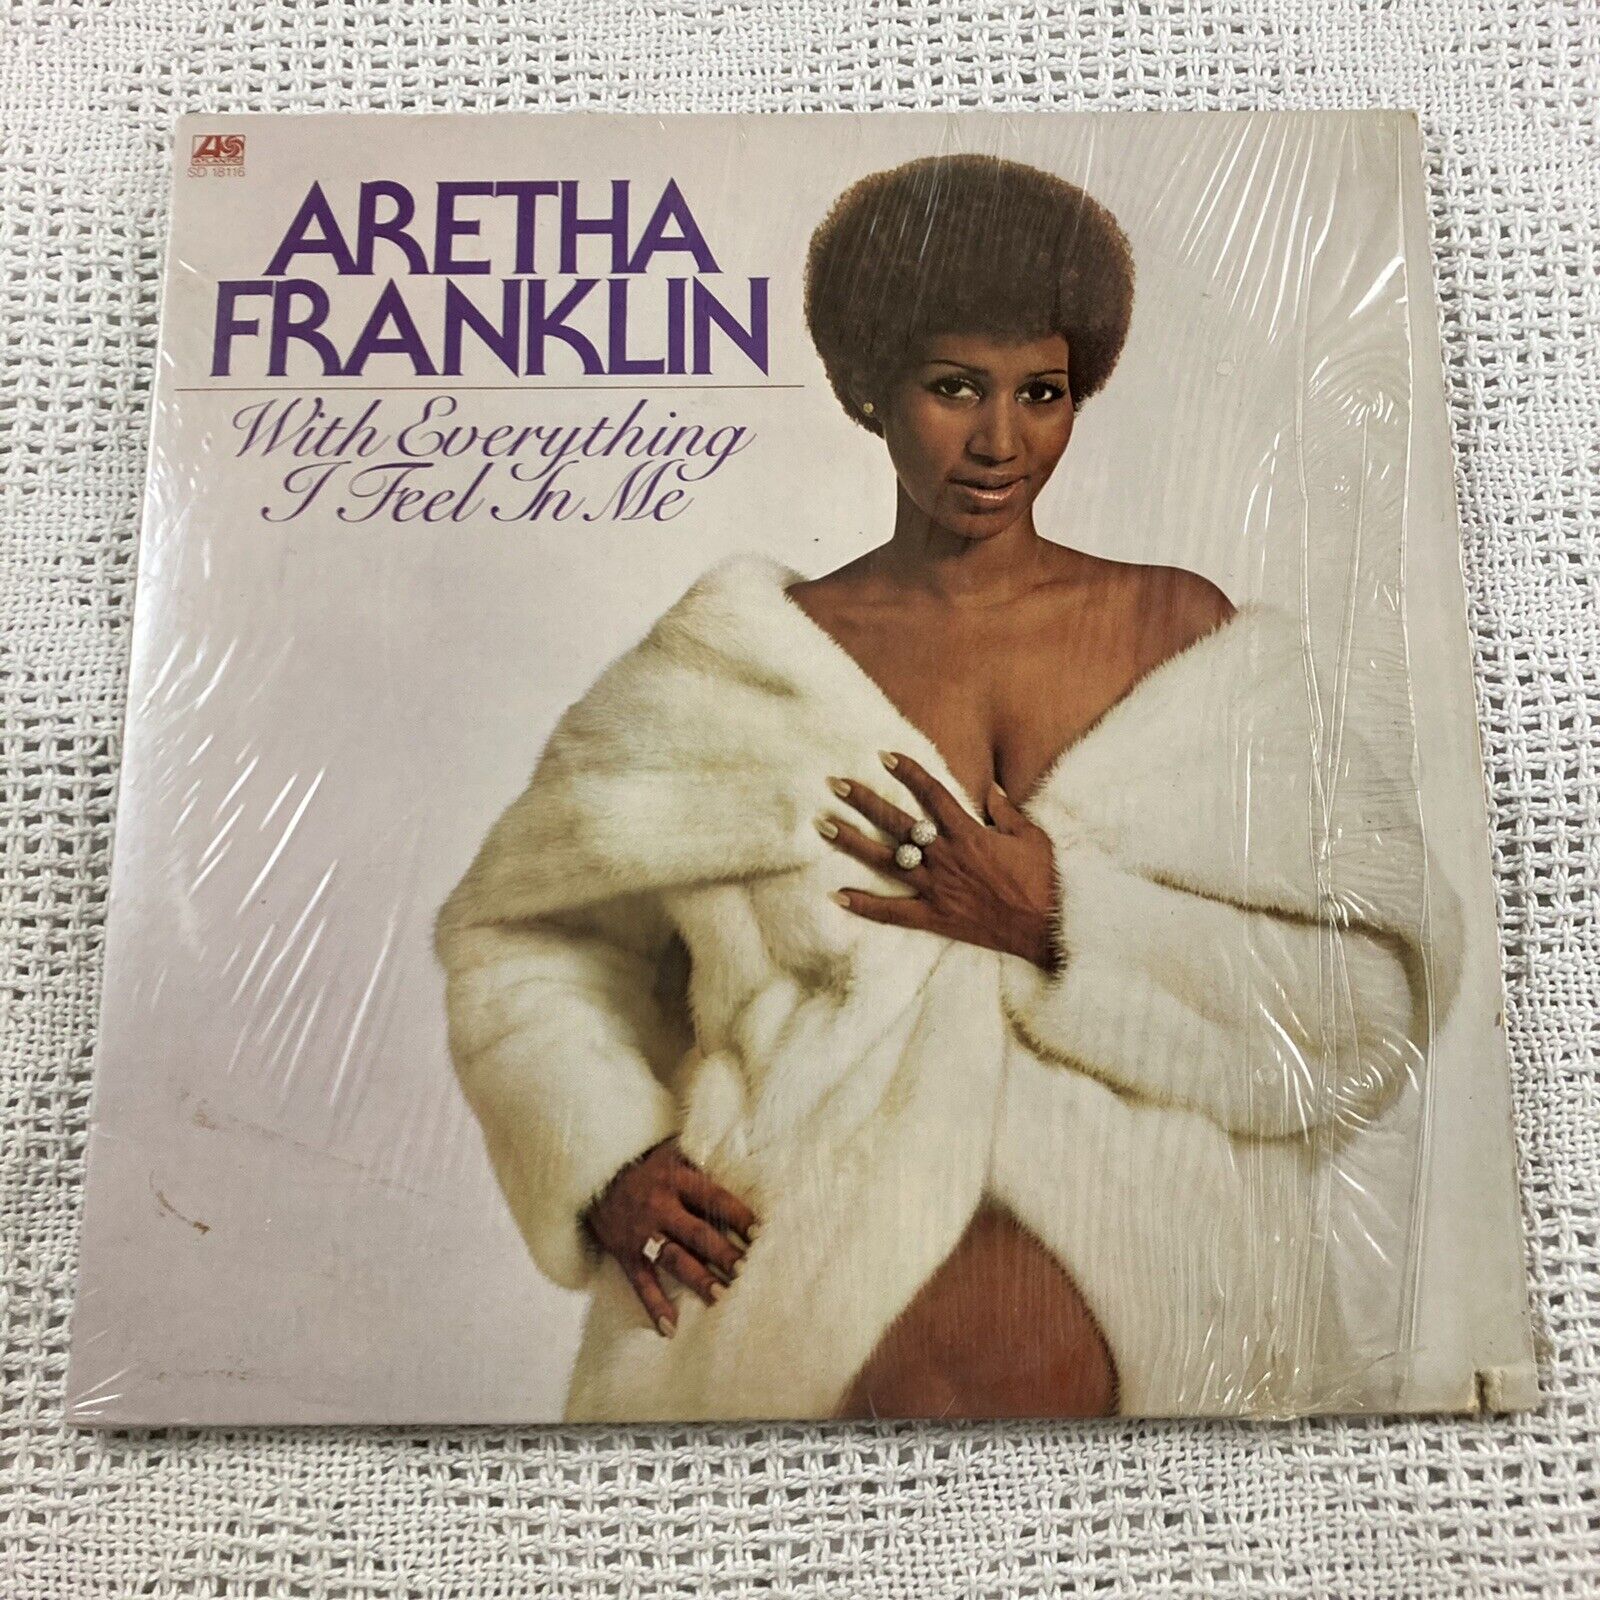 Aretha\'s Franklin With Everything I Feel in Me 1974 Vintage Vinyl Record G+VC